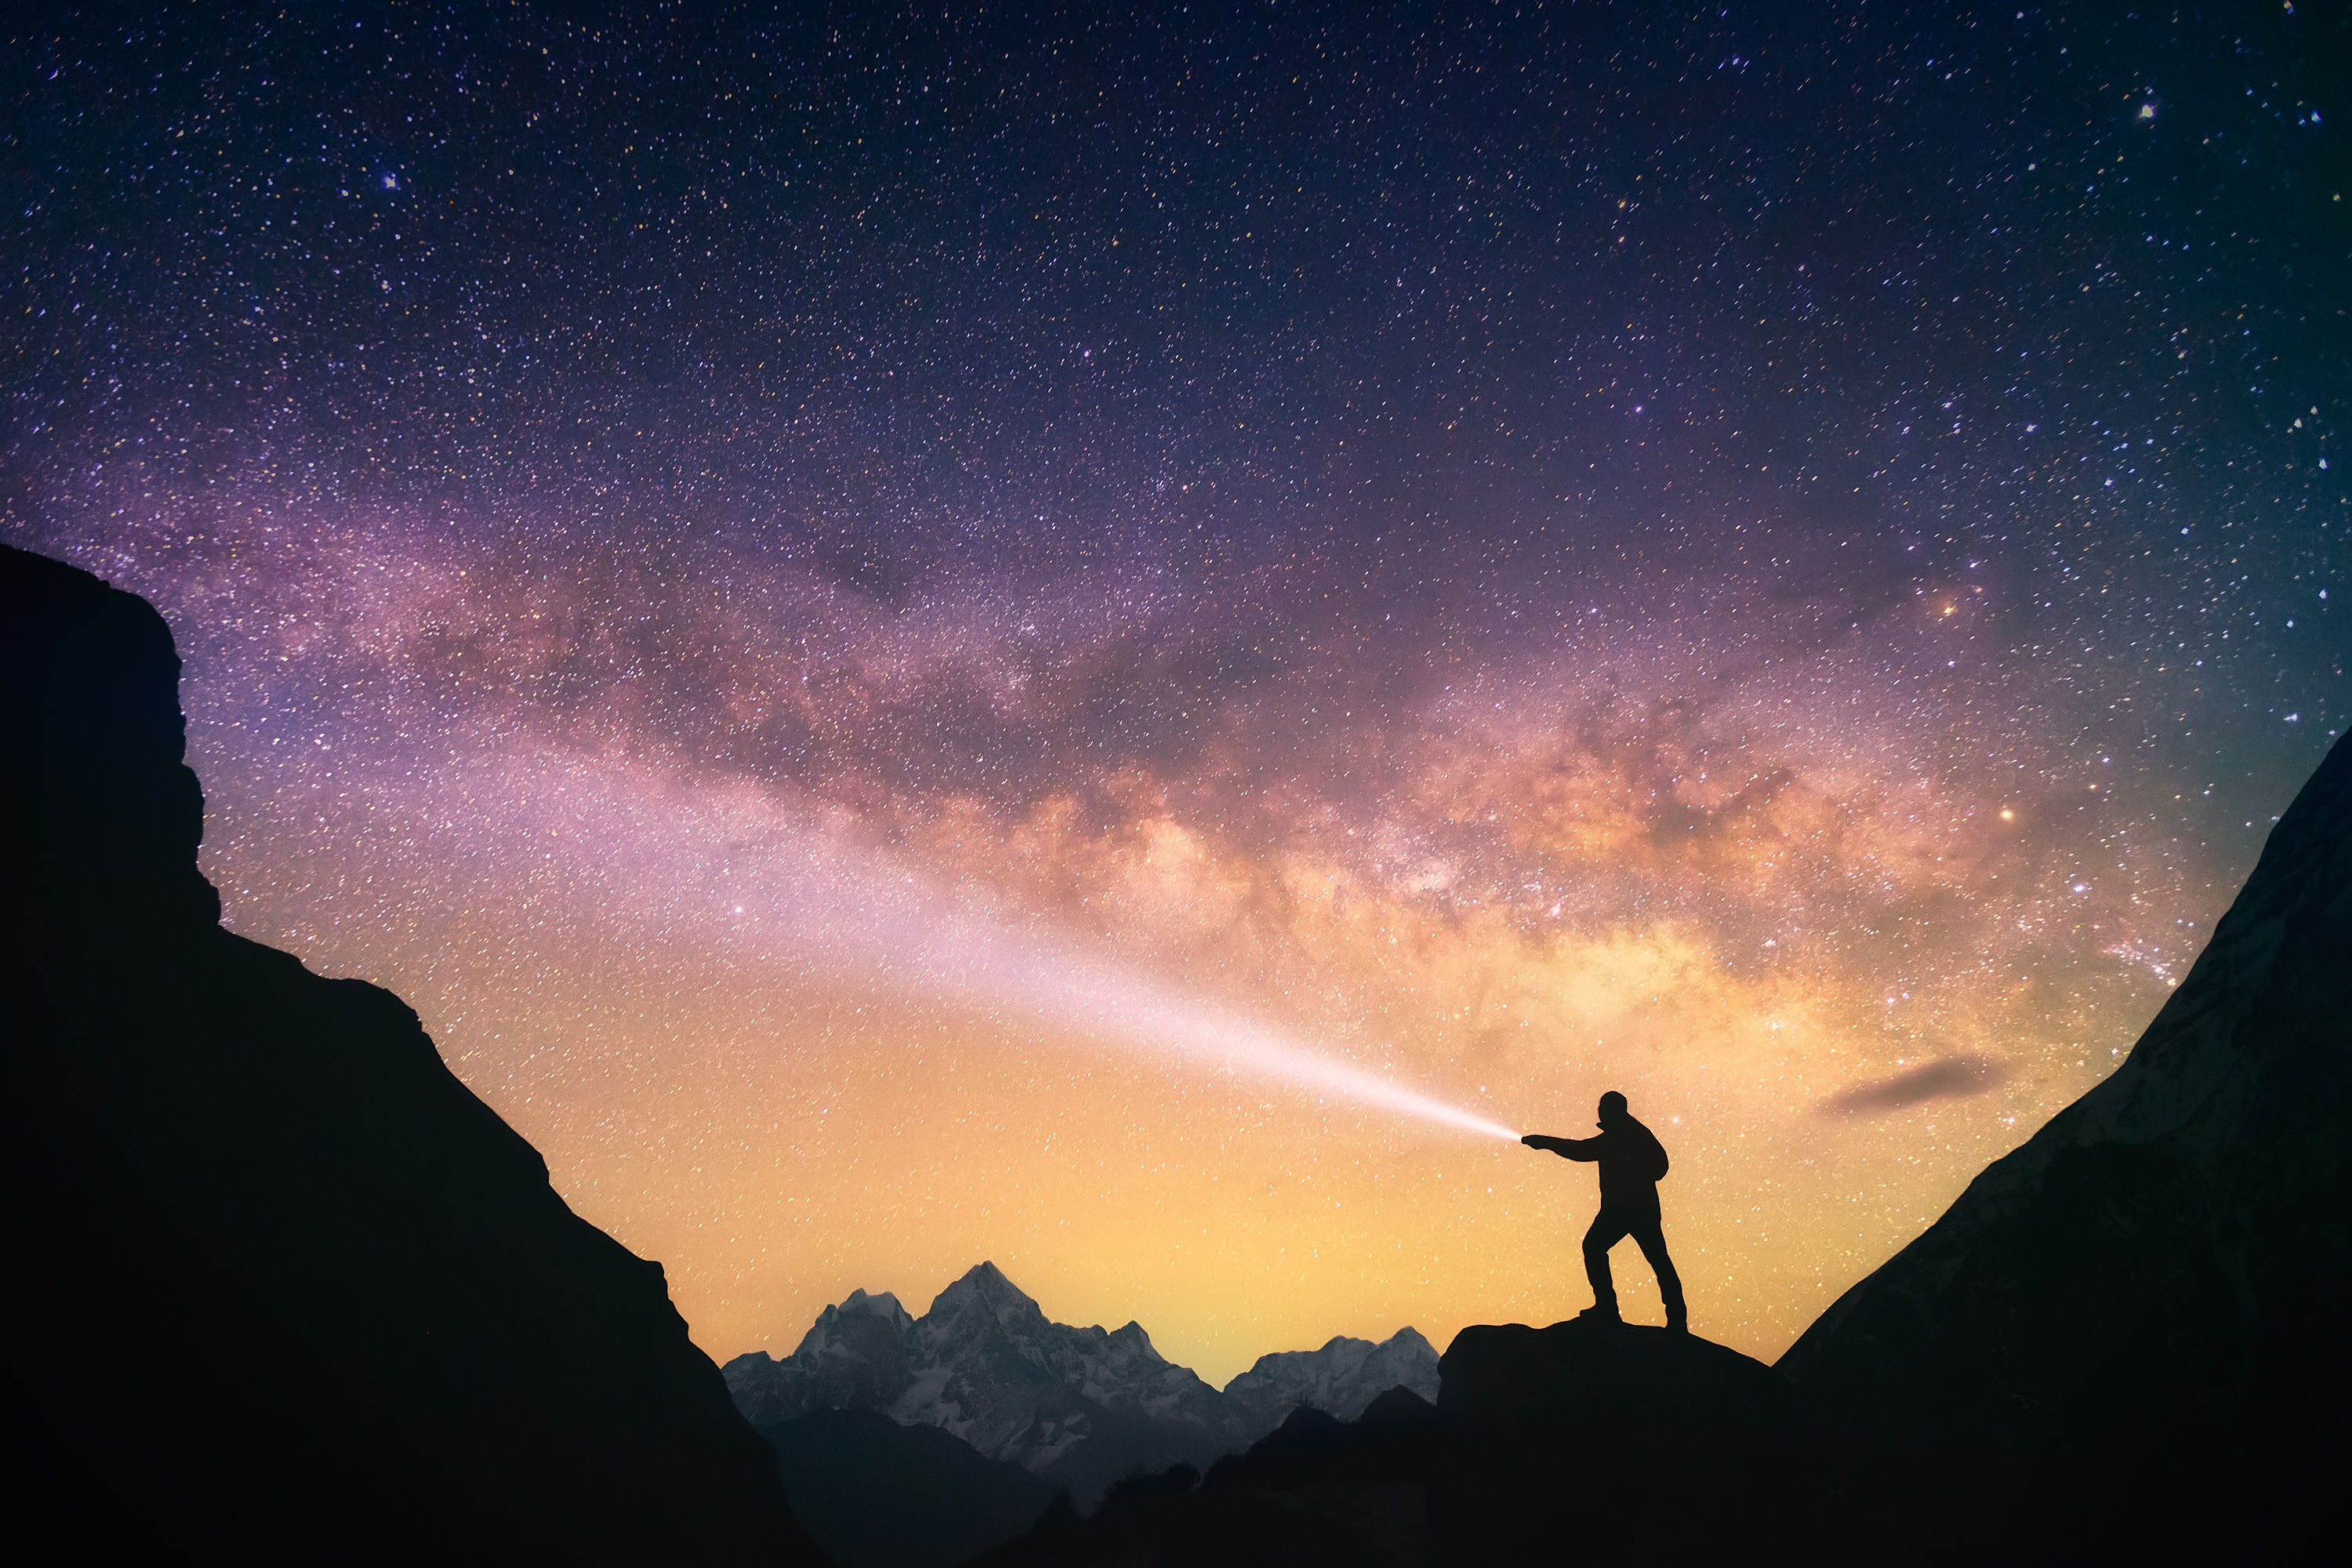 Man shining flashlight at starry sky in mountains